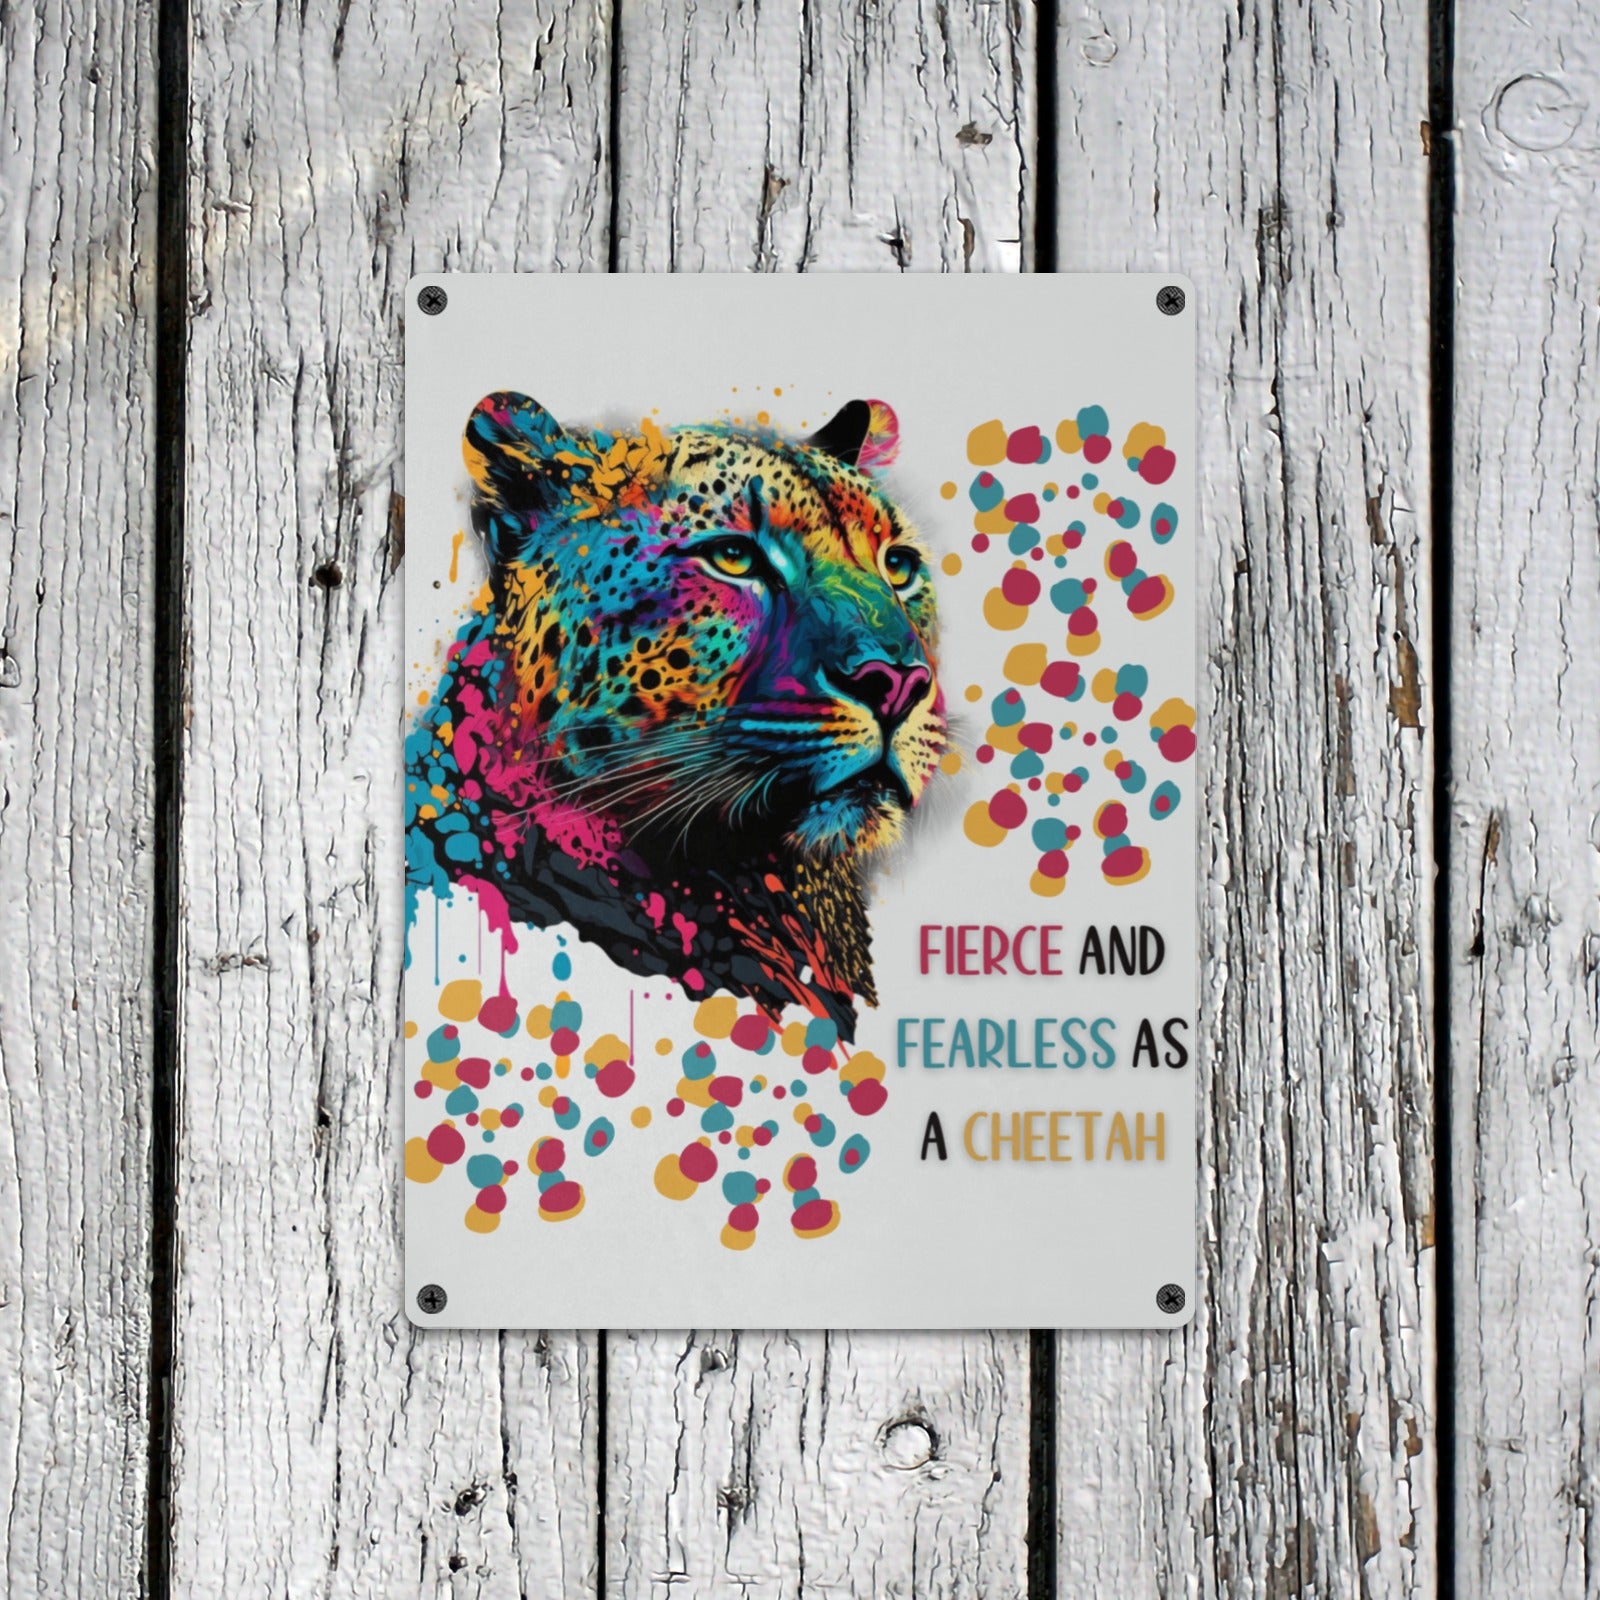 Cheetah Metal Sign - "Fierce & Fearless " Kids Room Decor | 12x16" Indoor/Outdoor Tin Sign by Cranberry Lake Designs  pen_spark